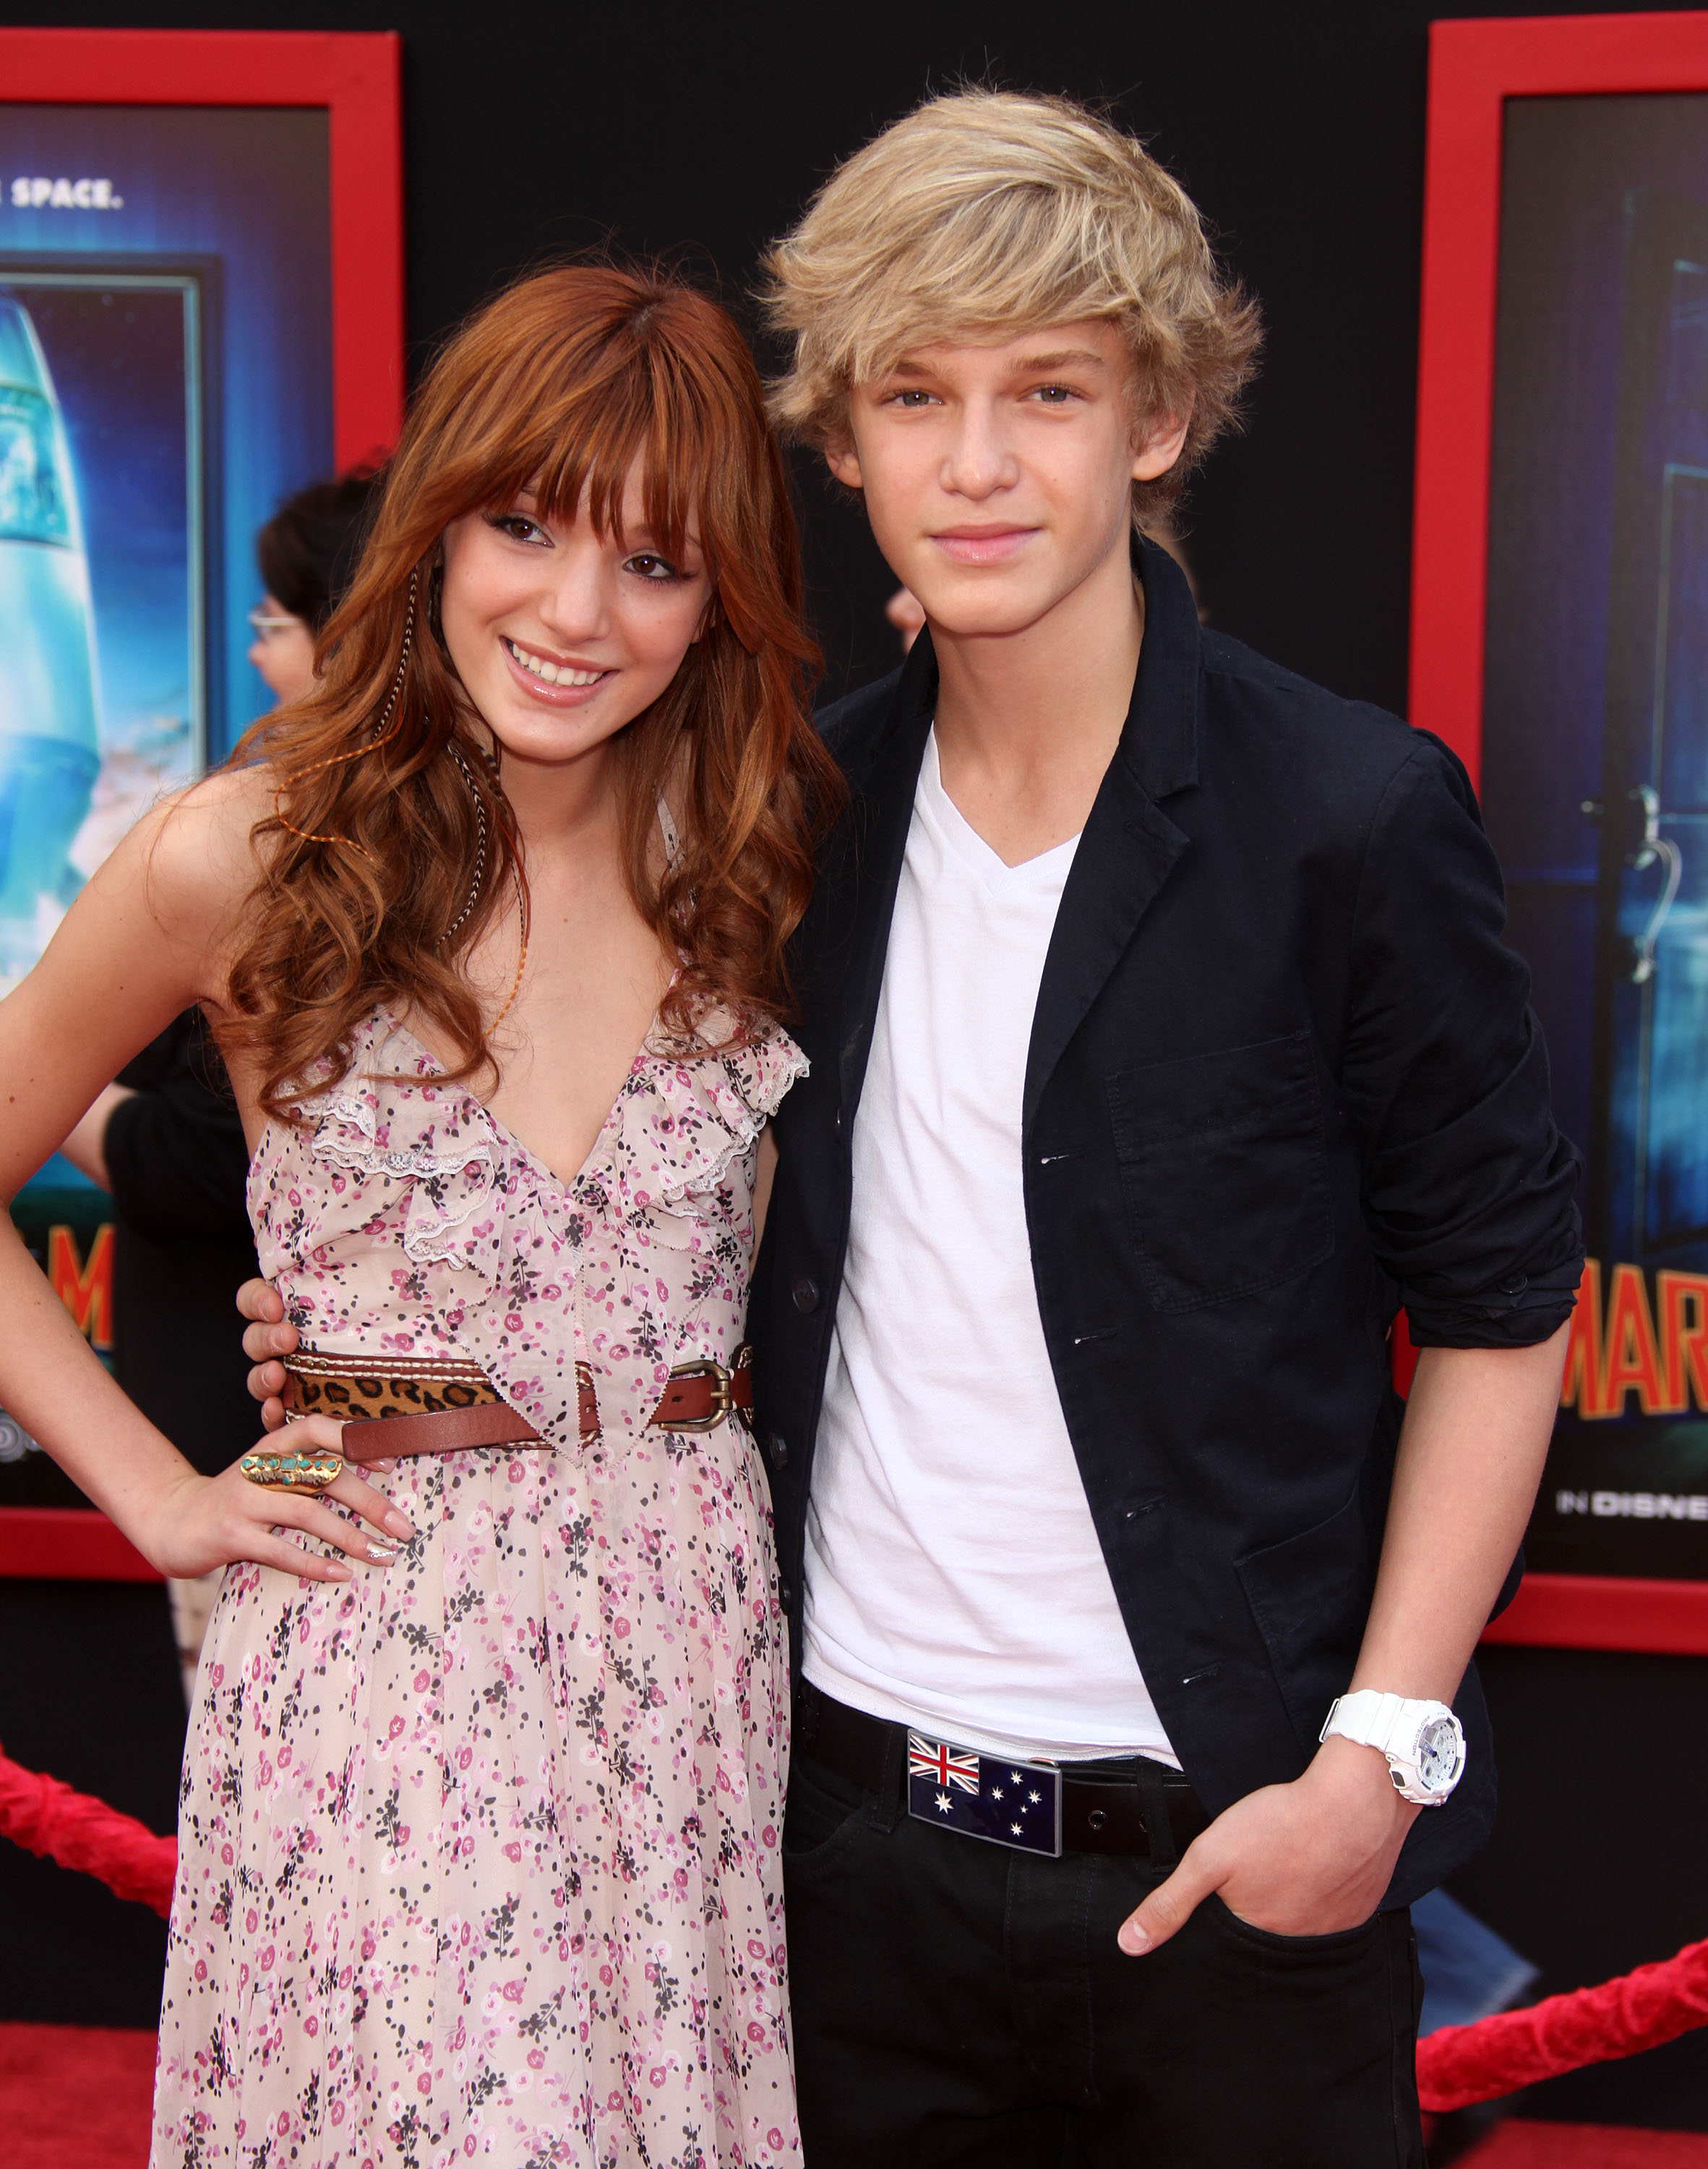 Cody Simpson Girlfriends Guide To Love Life, Who He Dated